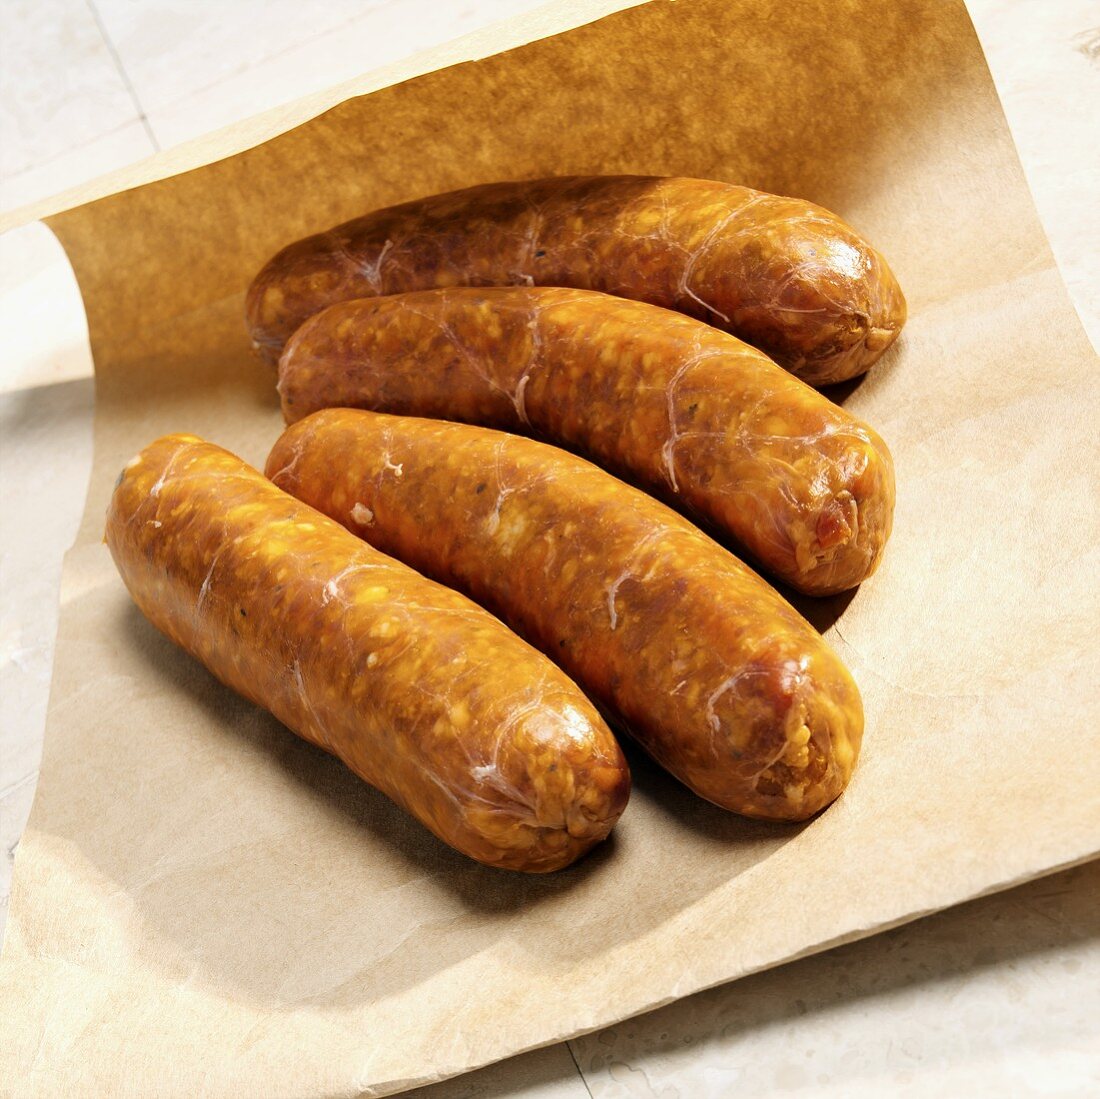 Four Italian sausages on brown paper